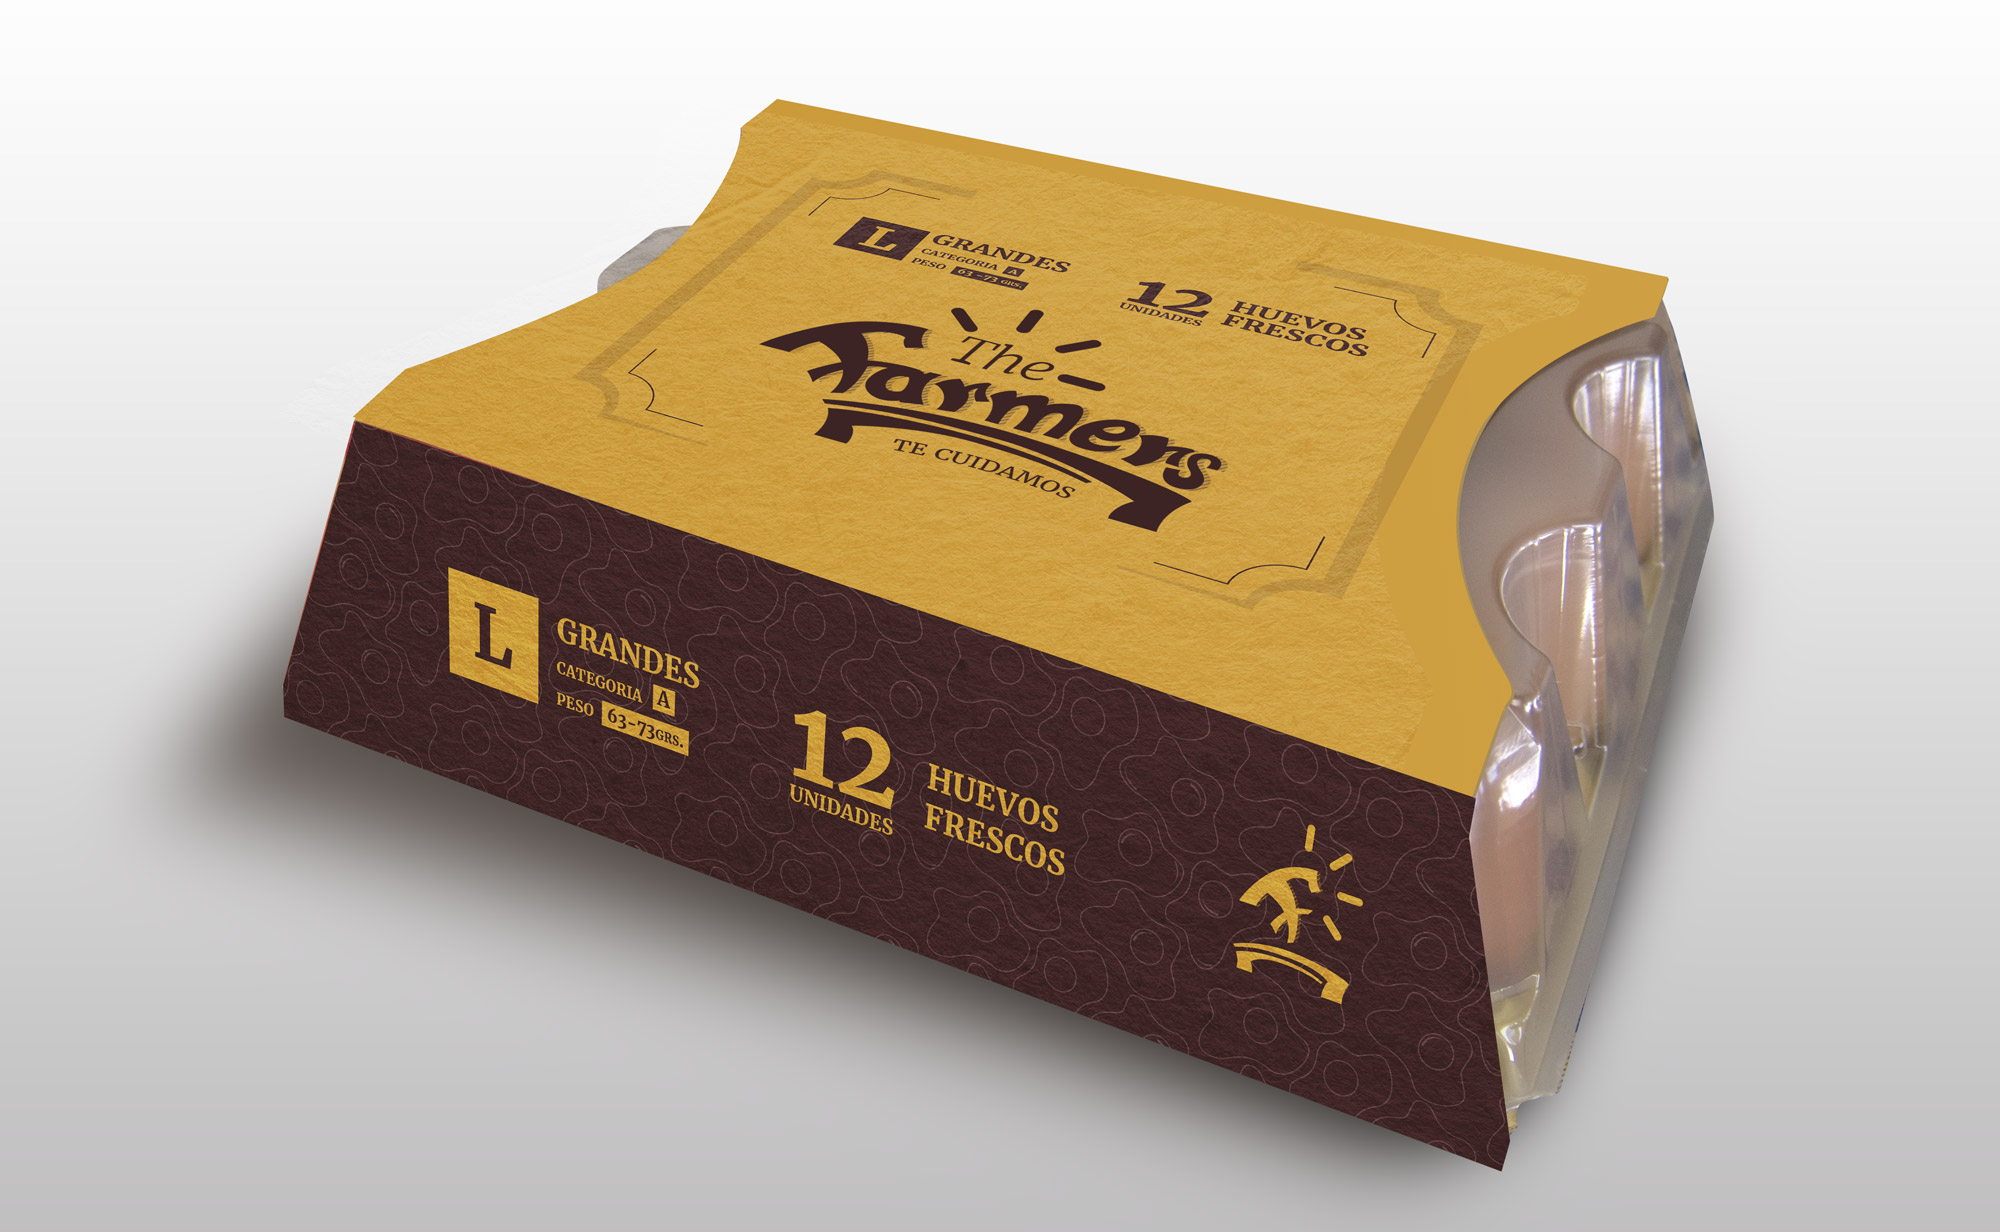 Eggs product packaging